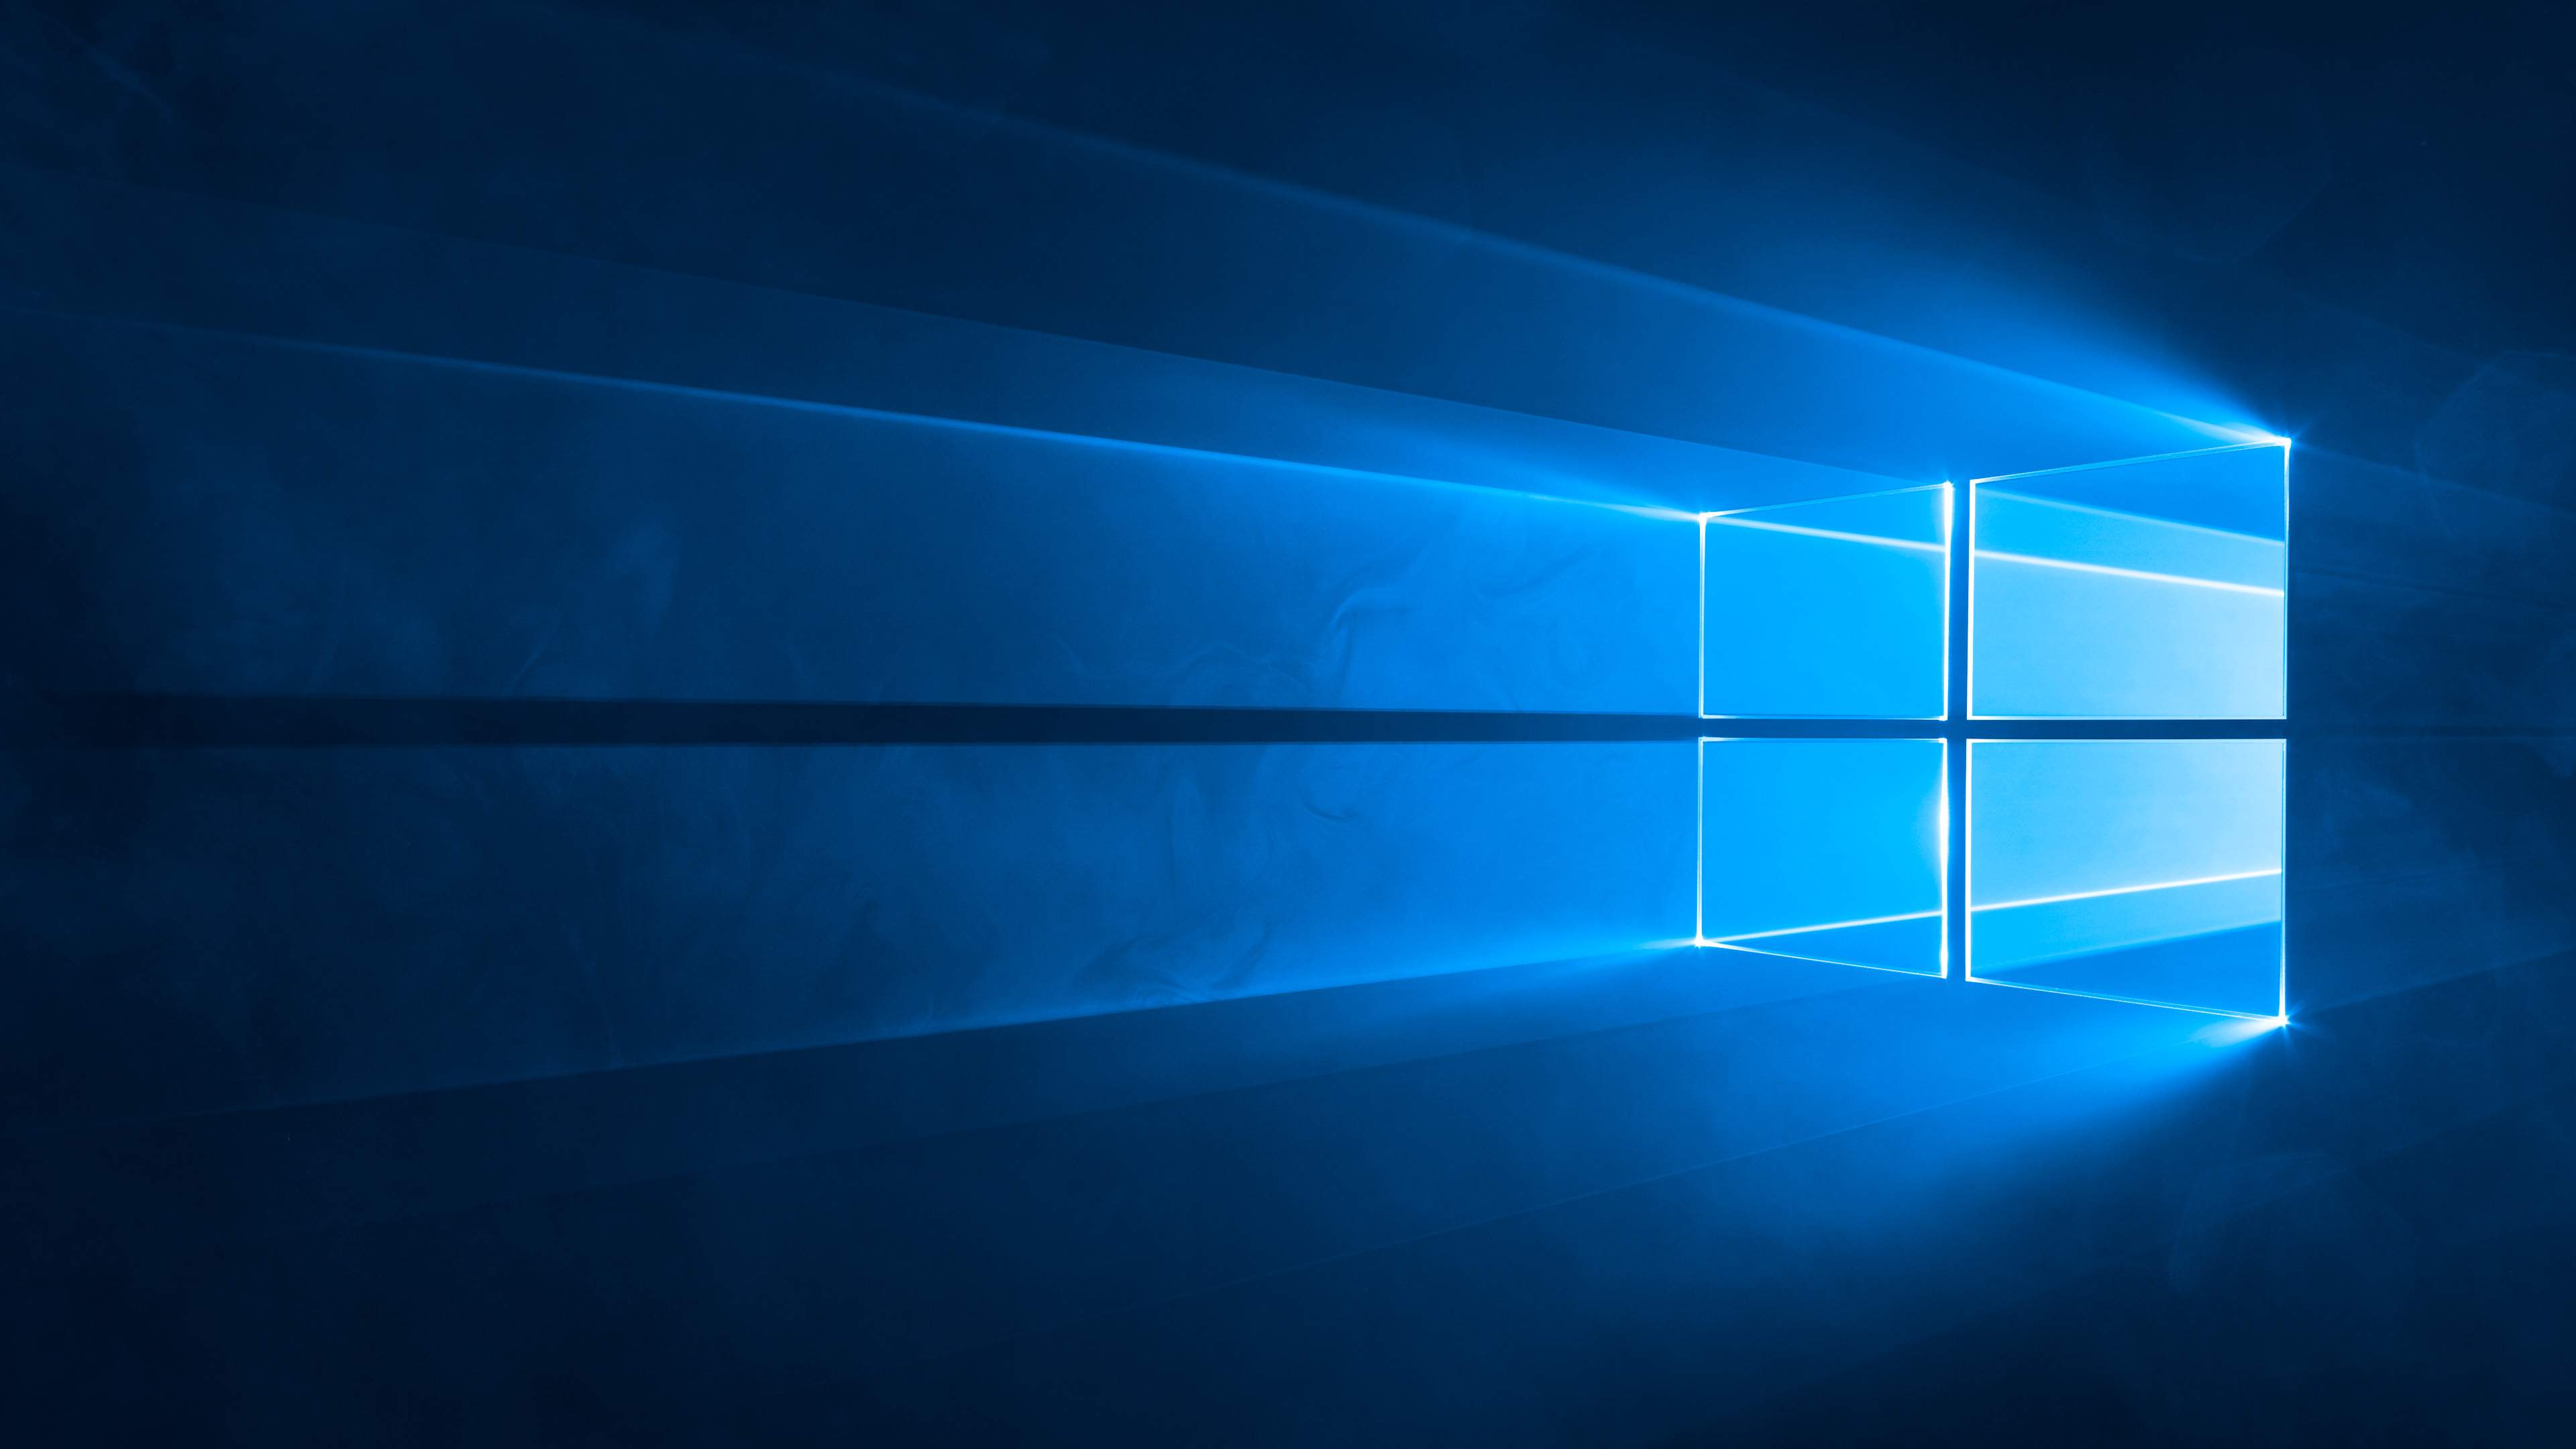 How to change your Windows 10 wallpaper | Alphr